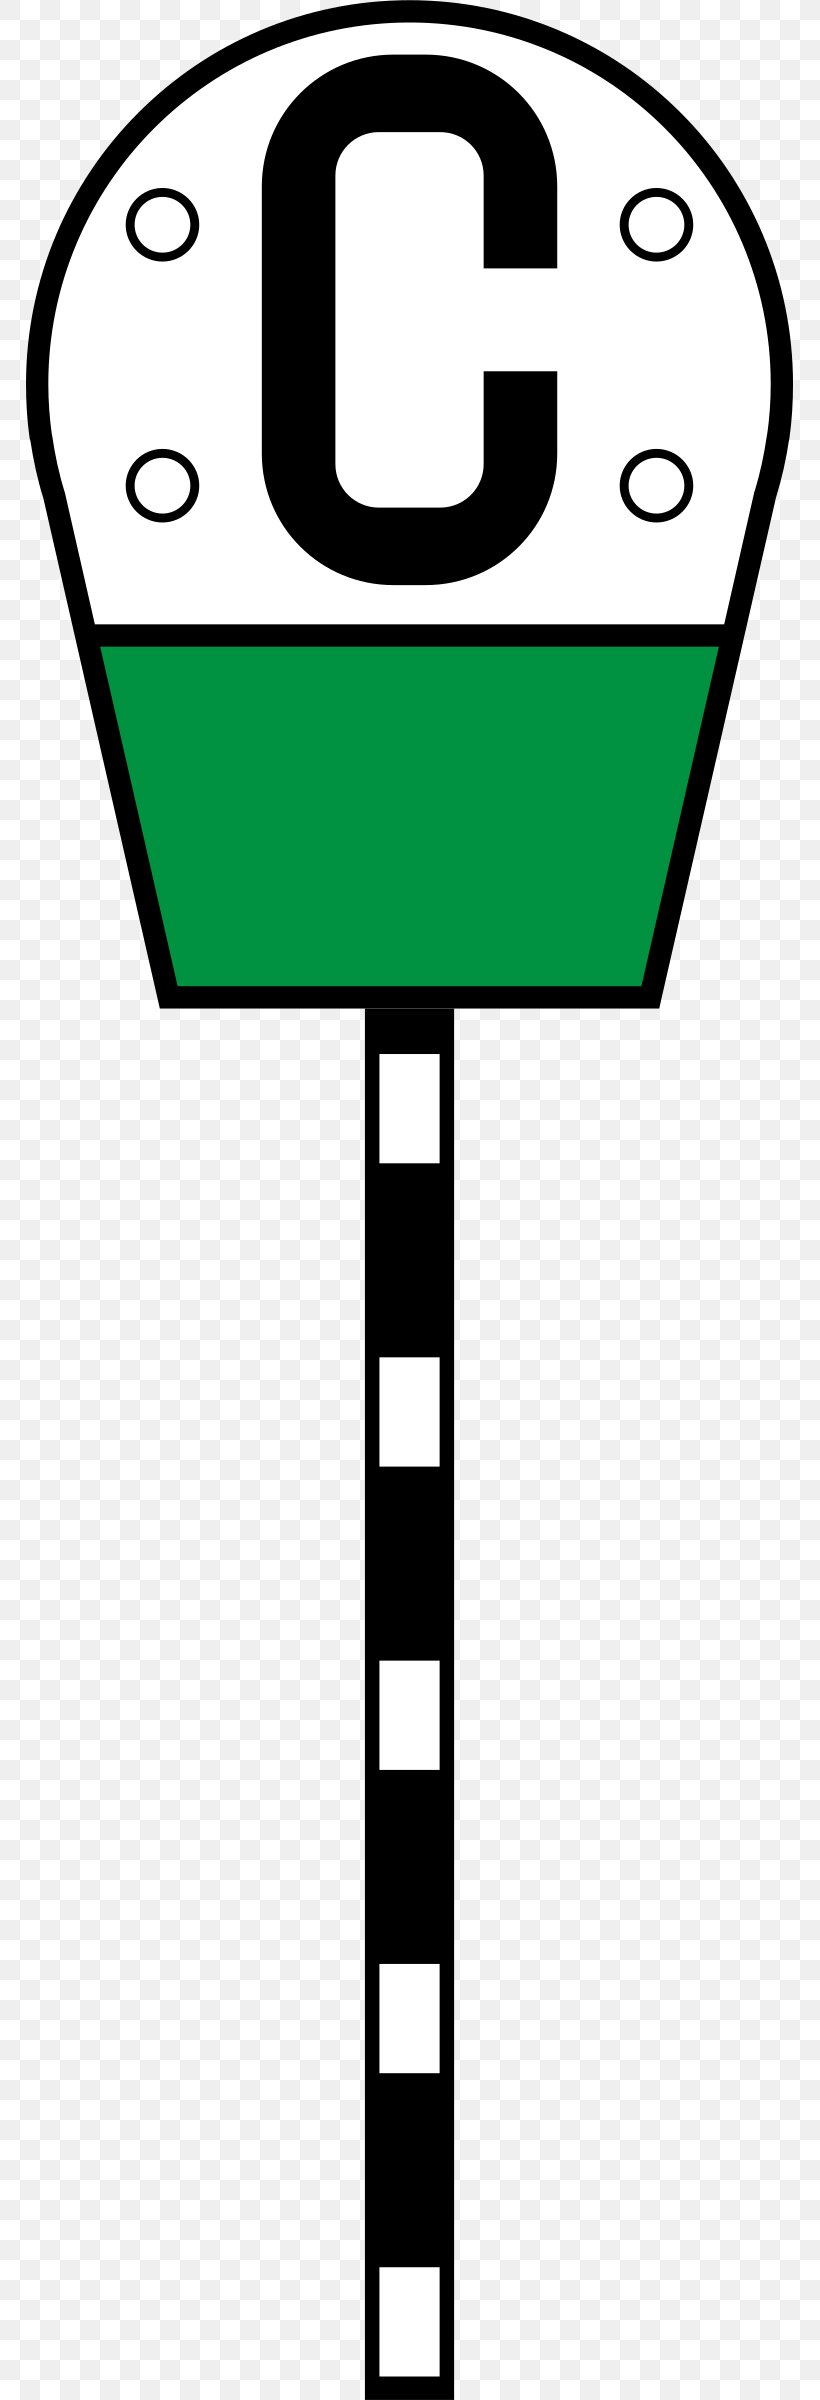 Rail Transport Sign Clip Art, PNG, 767x2400px, Rail Transport, Area, Black, Black And White, Green Download Free